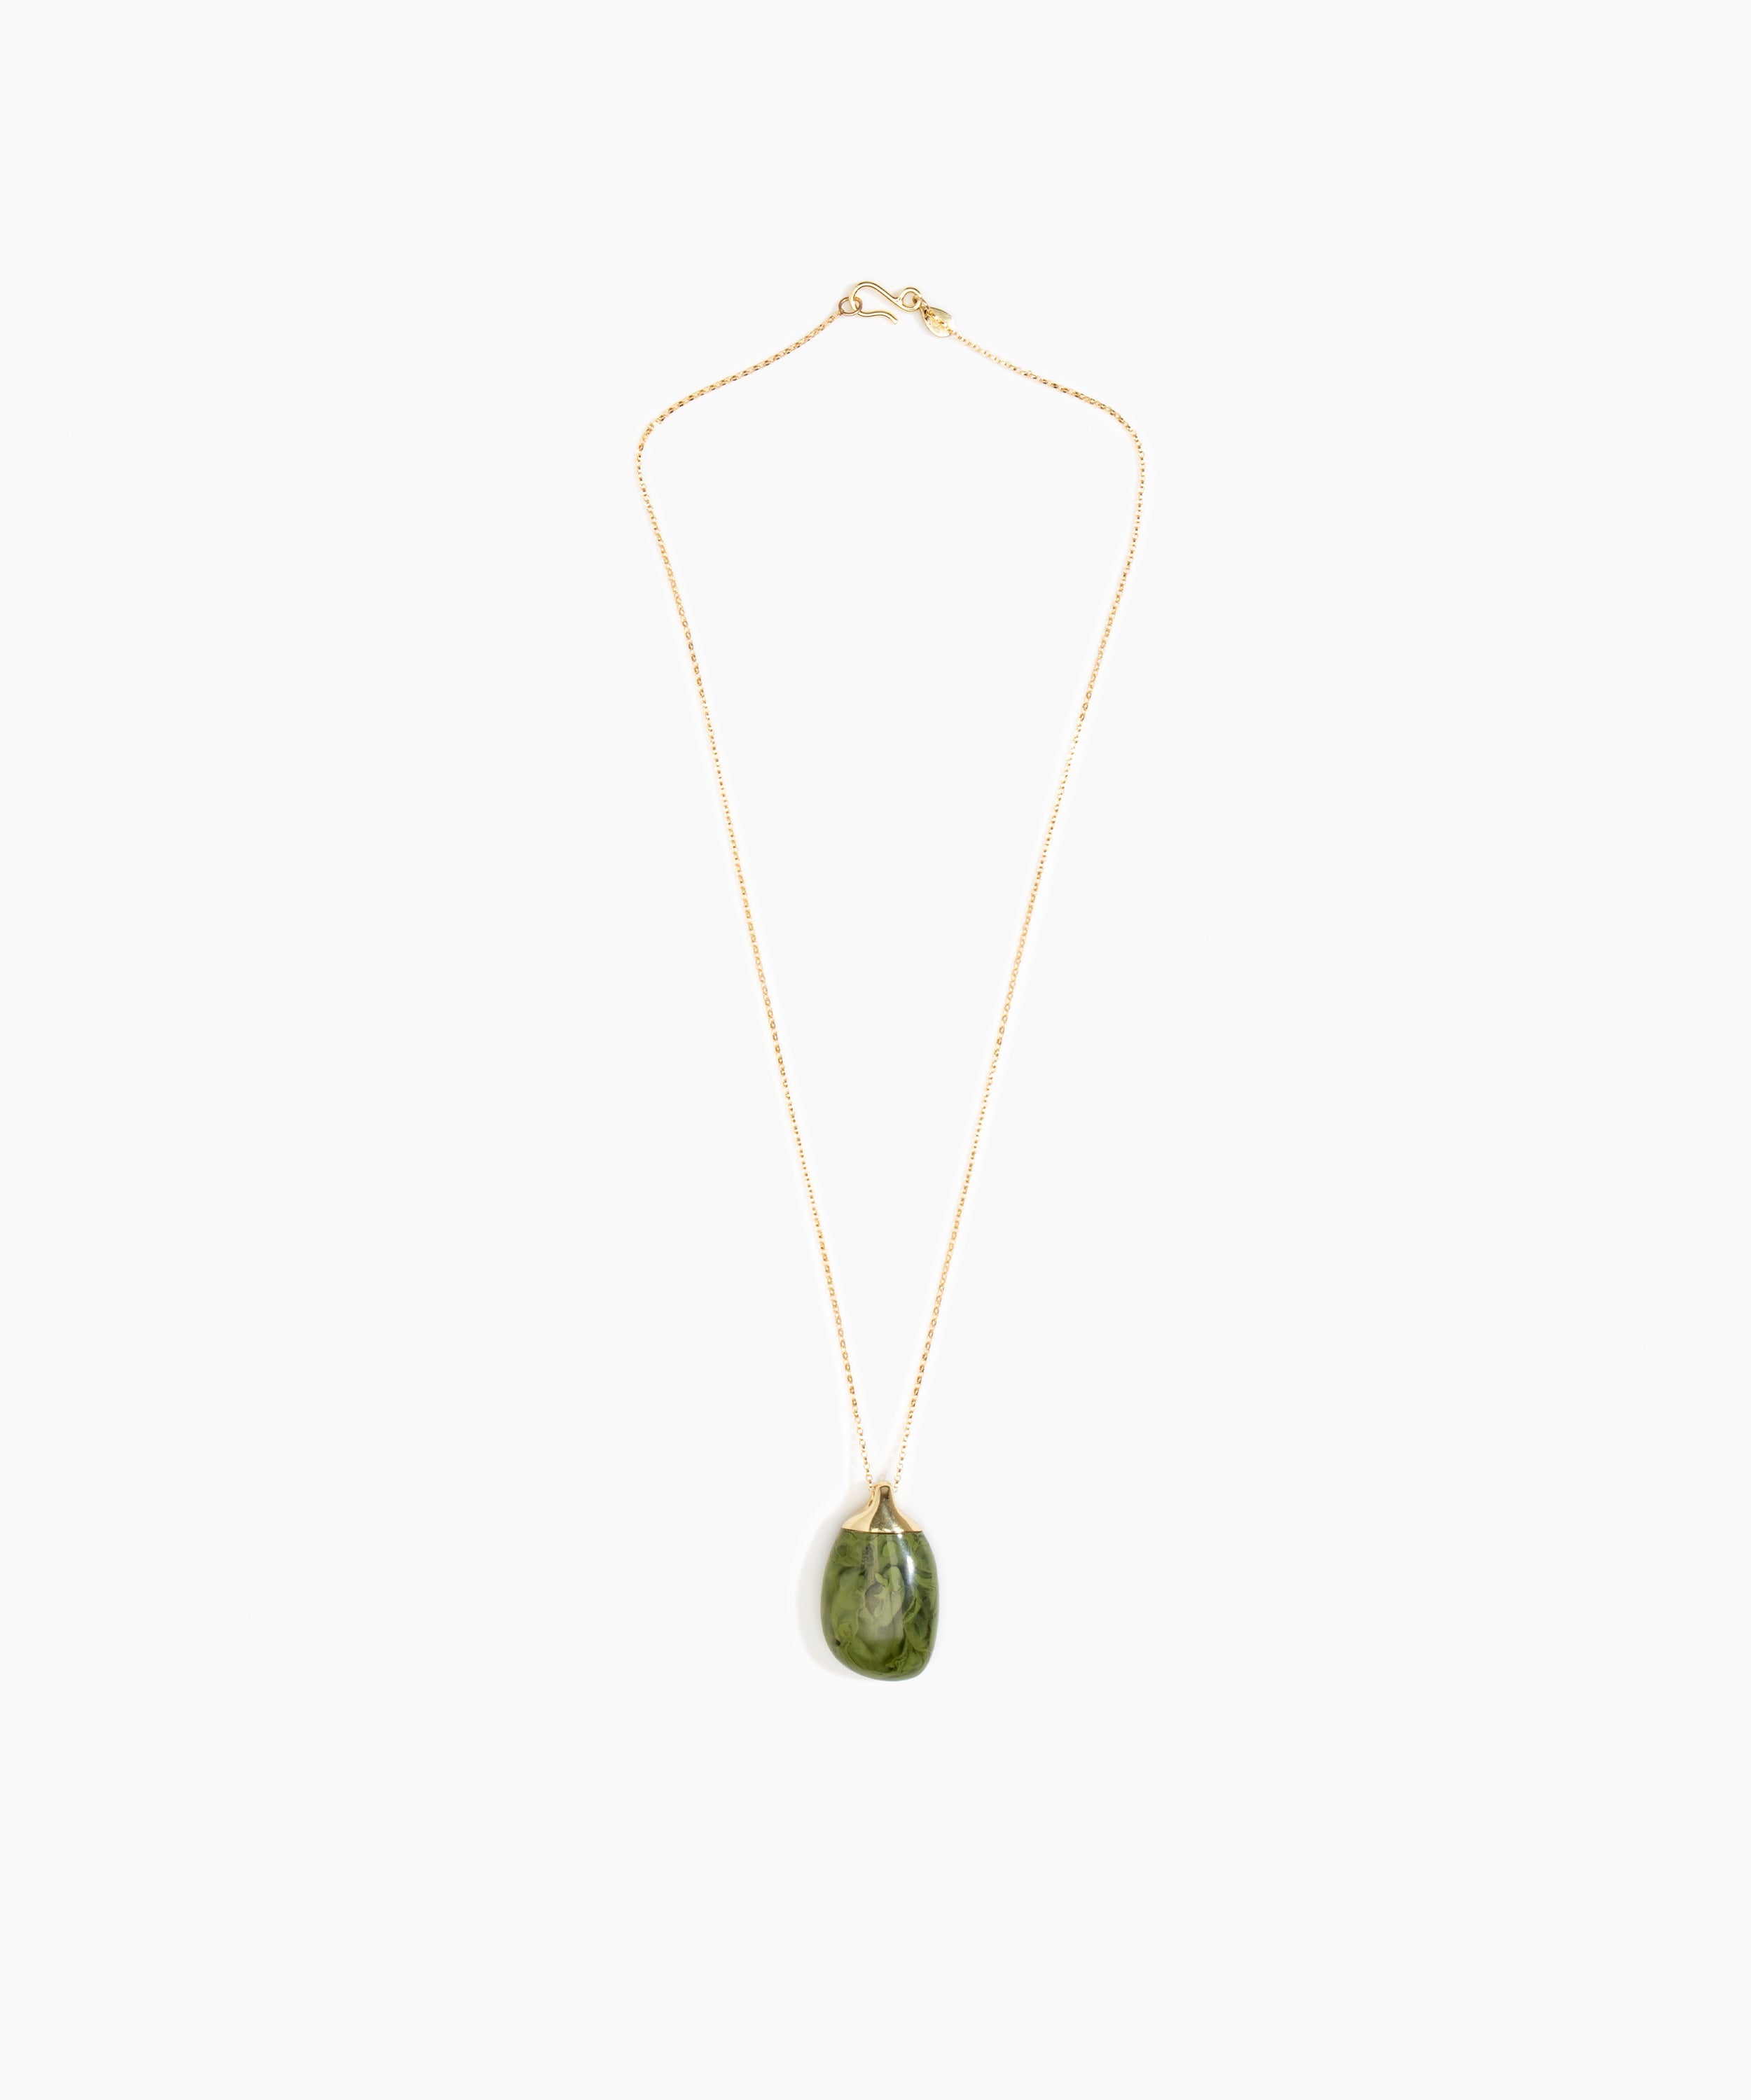 Dinosaur Designs Medium River Rock Pendant Necklaces in Olive Colour resin with Gold-Filled Material